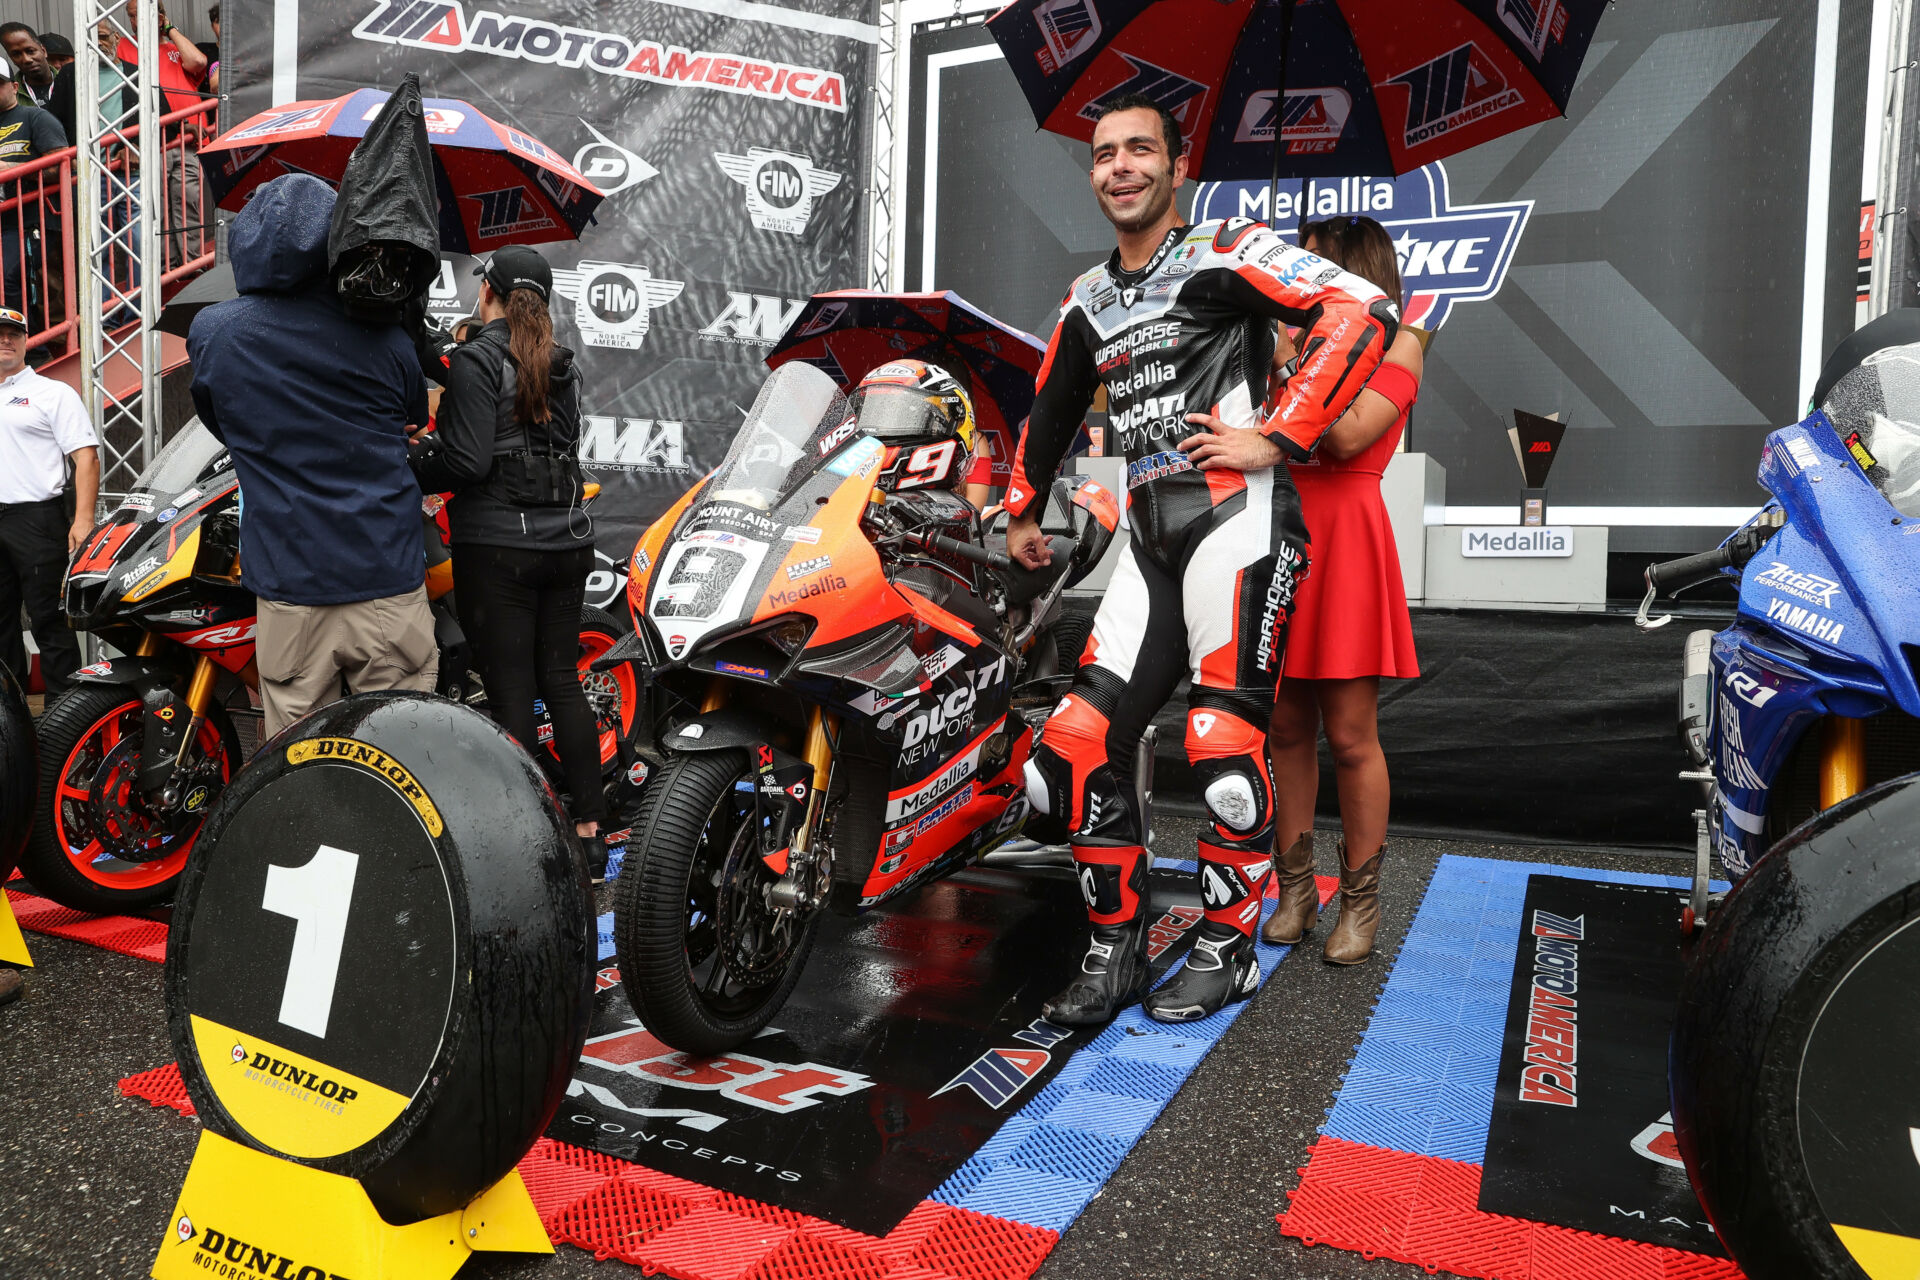 A happy Danilo Petrucci in Victory Circle after winning MotoAmerica Superbike Race Two at New Jersey Motorsports Park. Photo by Brian J. Nelson.